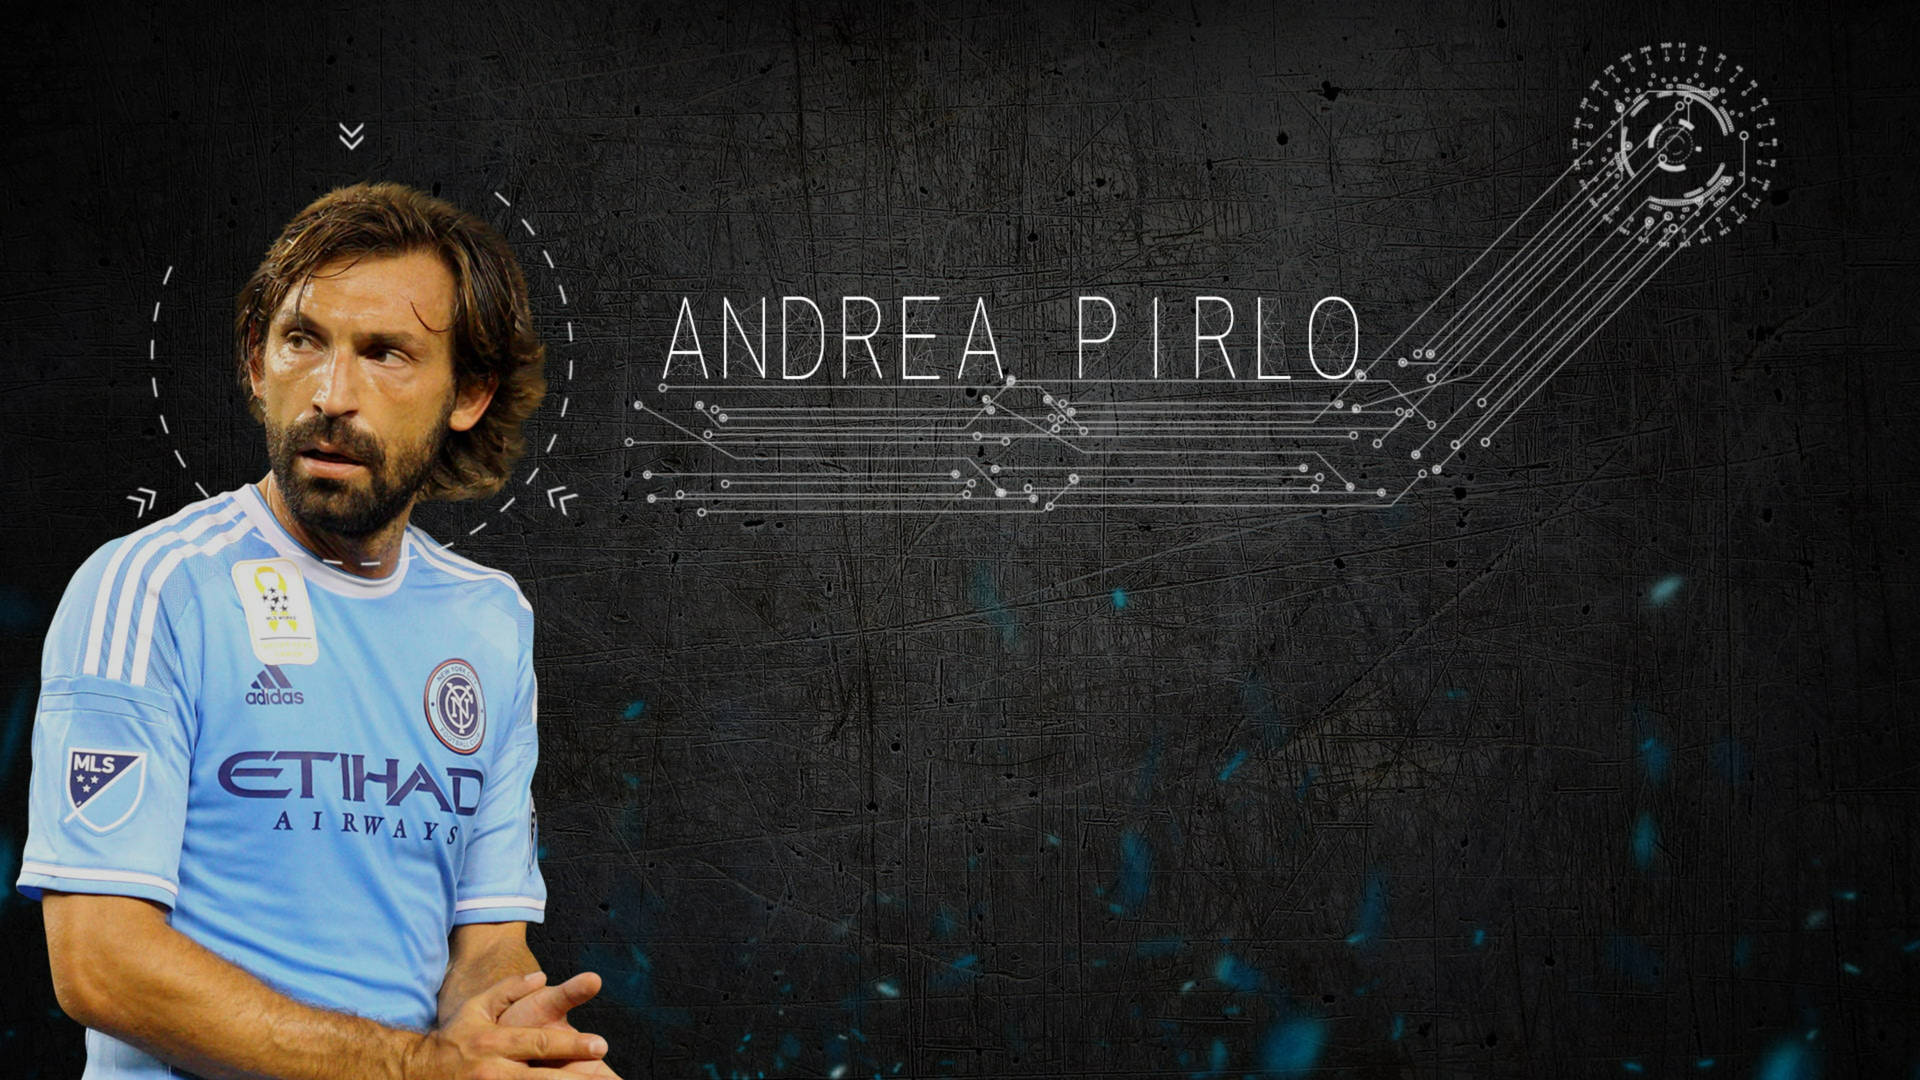 Andrea Pirlo Abstract Artwork Background